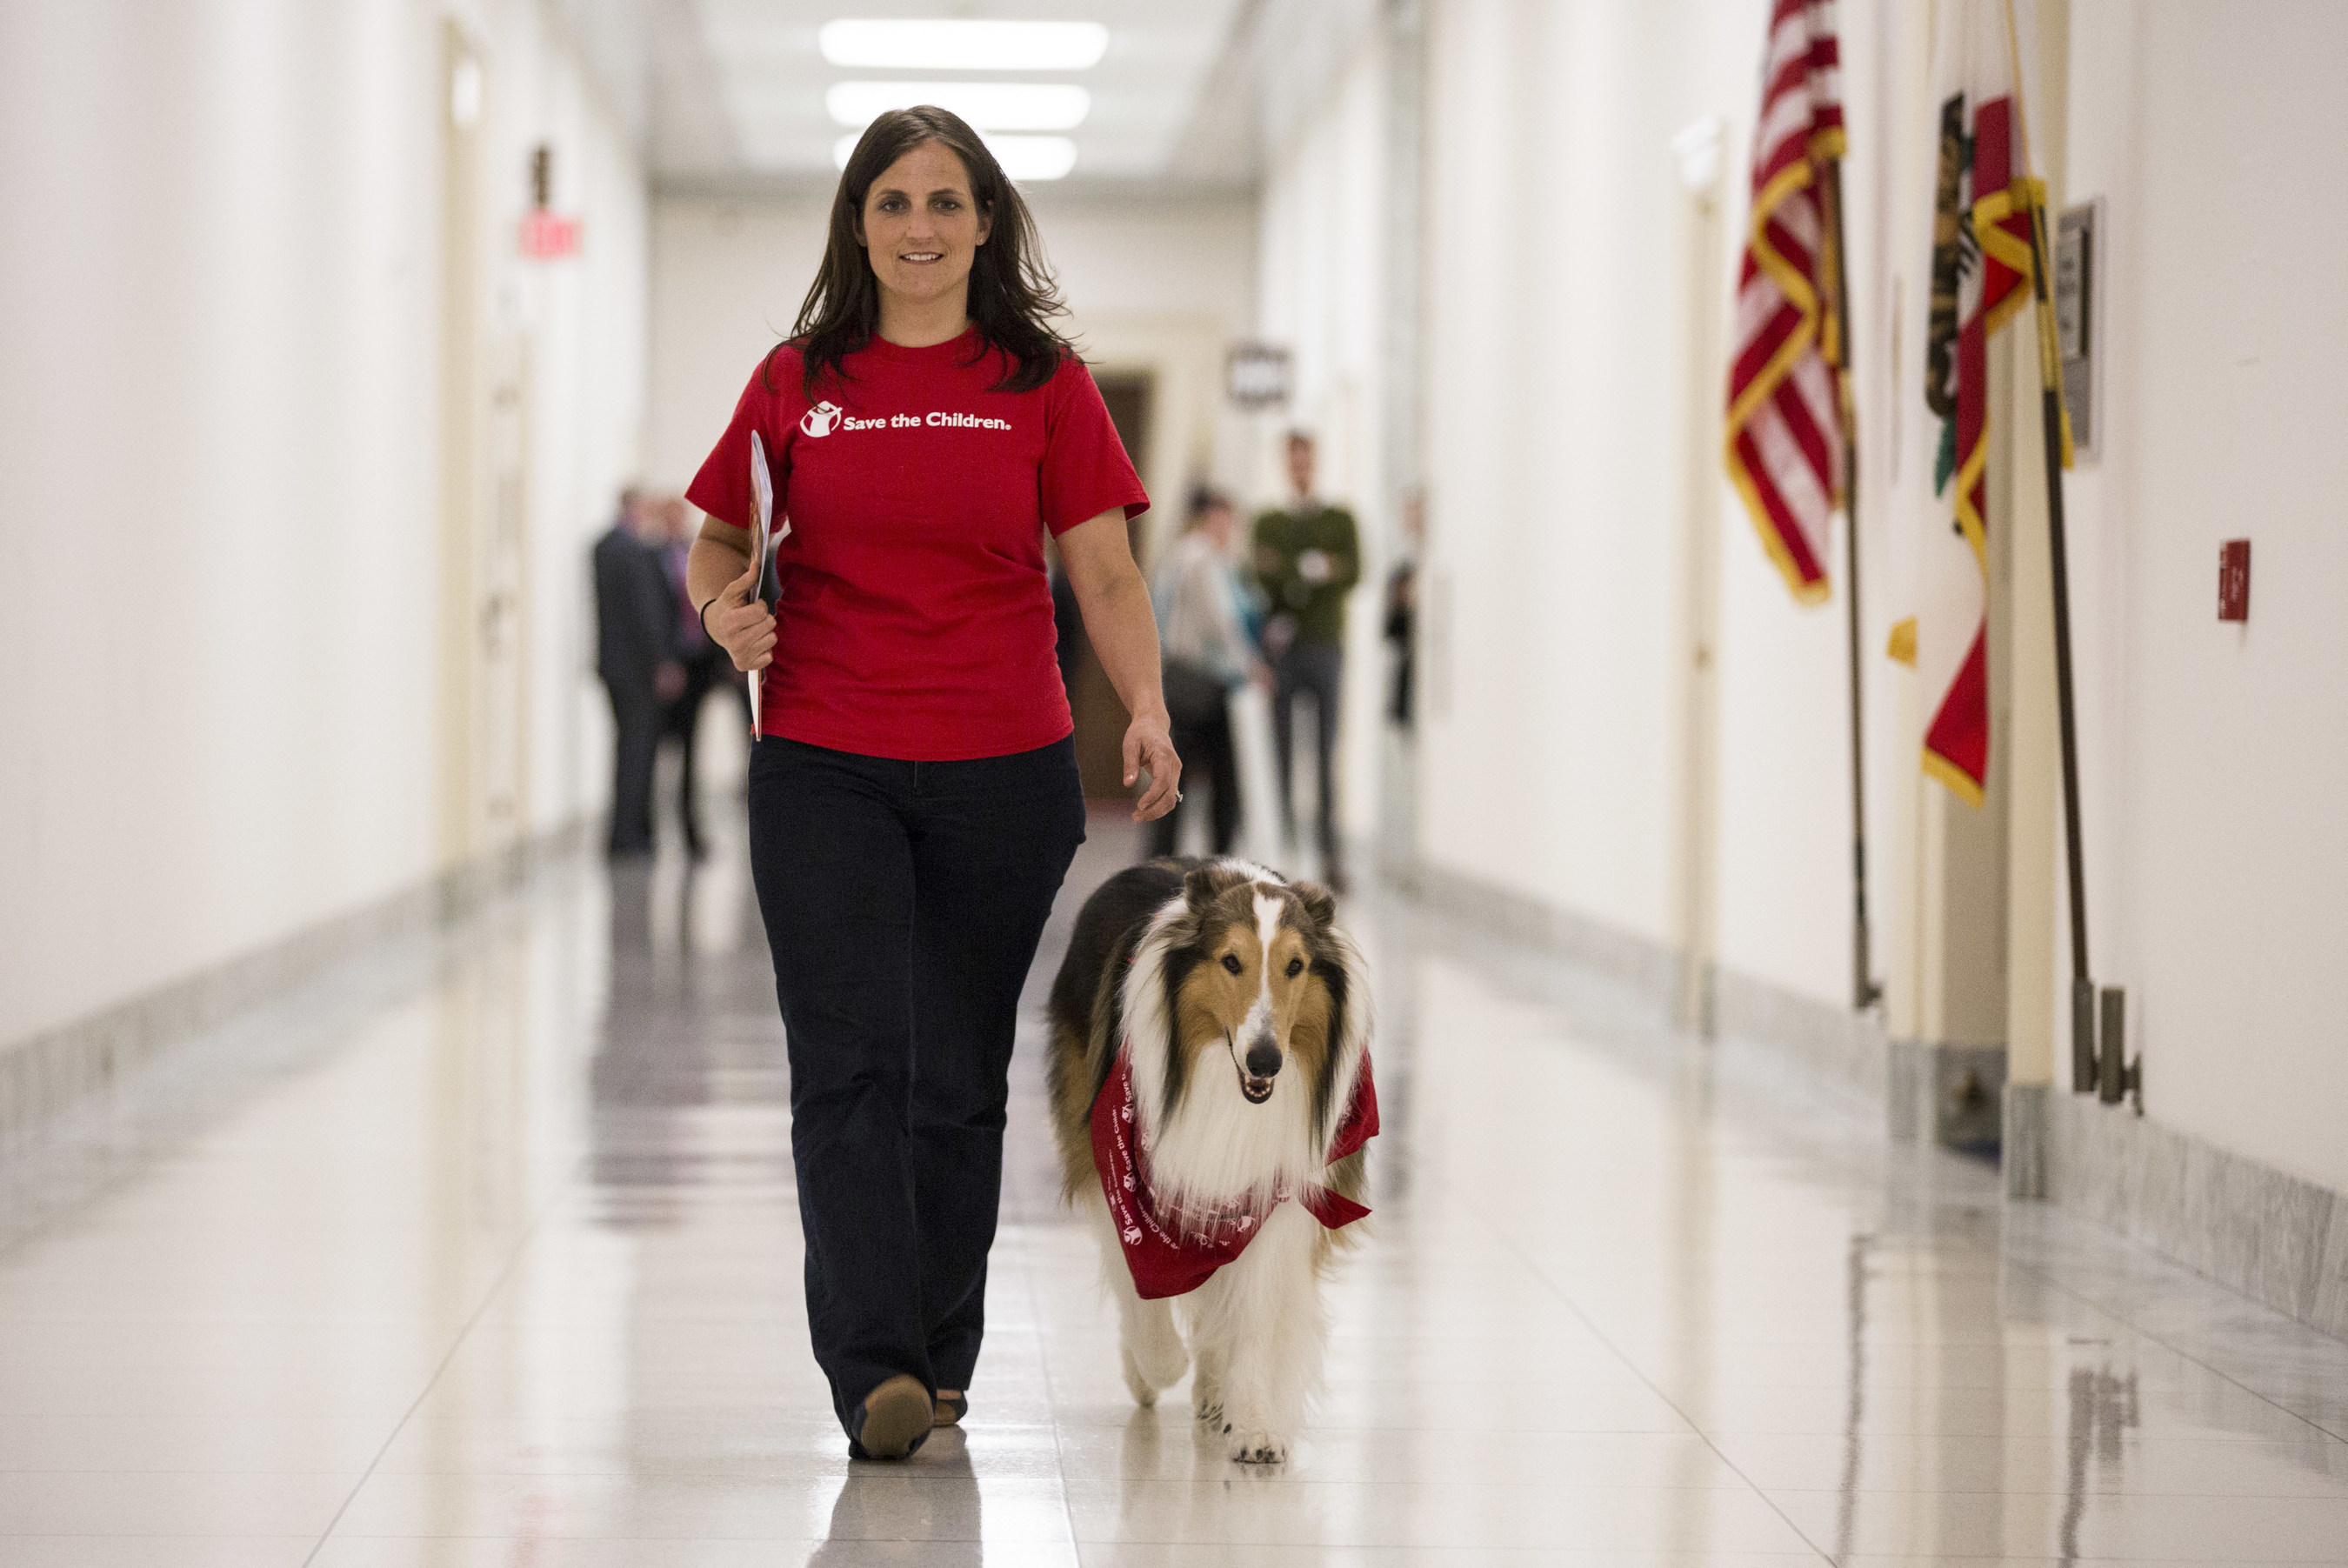 Lassie, Save the Children's animal ambassador for emergency preparedness, walks through the halls Congress with Save the Children's Erin Bradshaw on her way to help lead a Wednesday Congressional briefing on Capitol Hill in Washington, DC, on April 29, 2015.